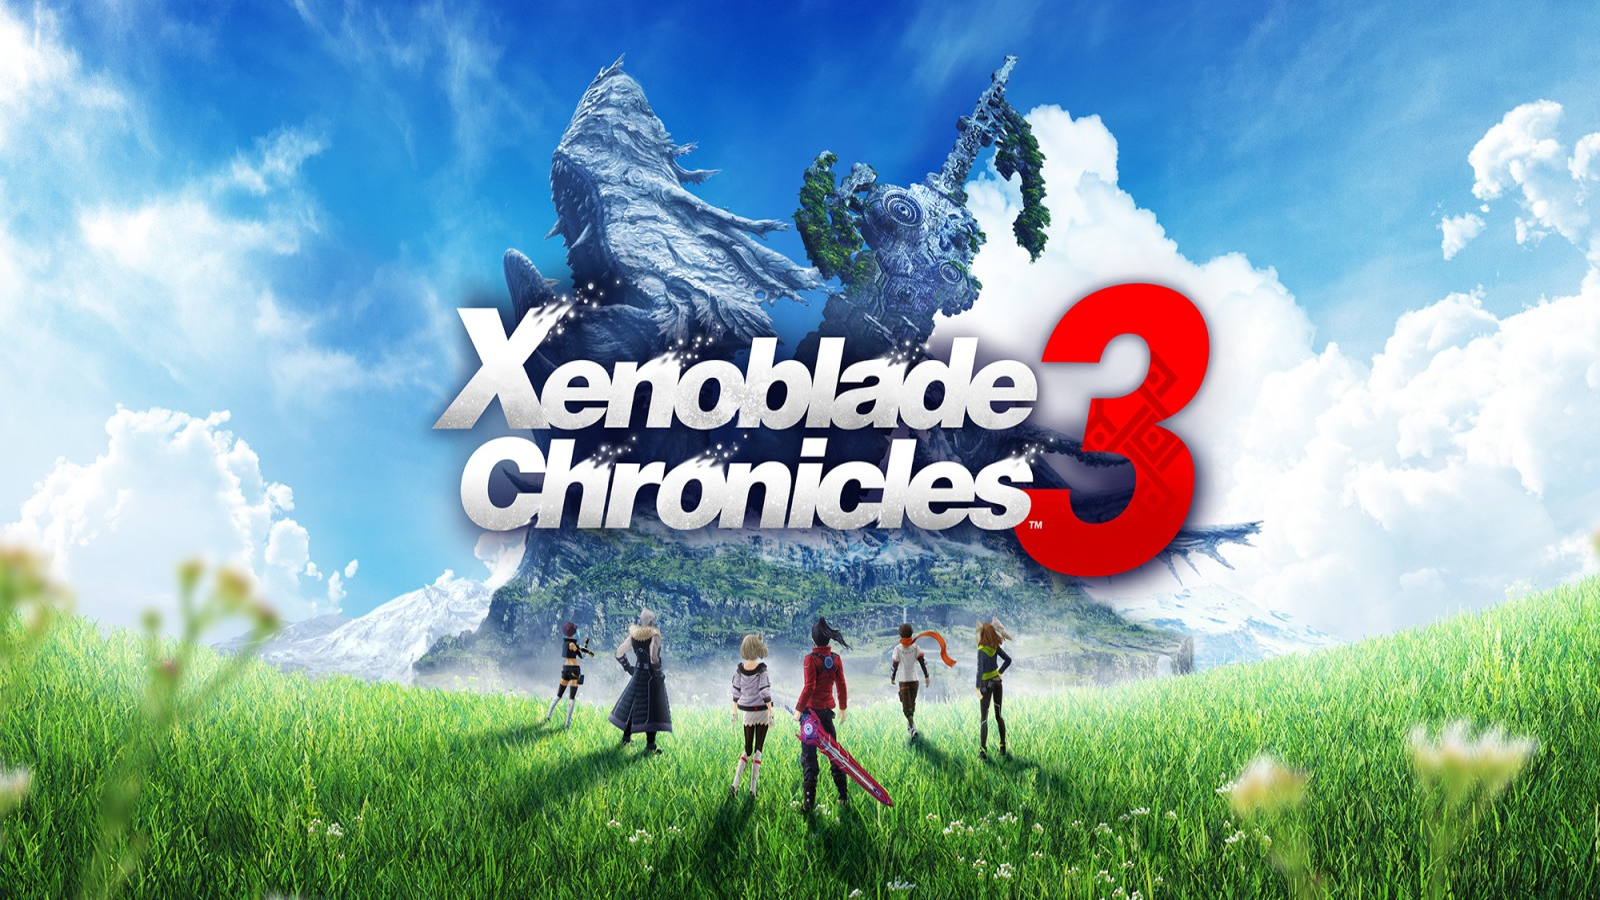 Xenoblade Chronicles 3 walks through its extensive gameplay mechanics and  announces an upcoming Expansion Pass in a new Nintendo Direct presentation